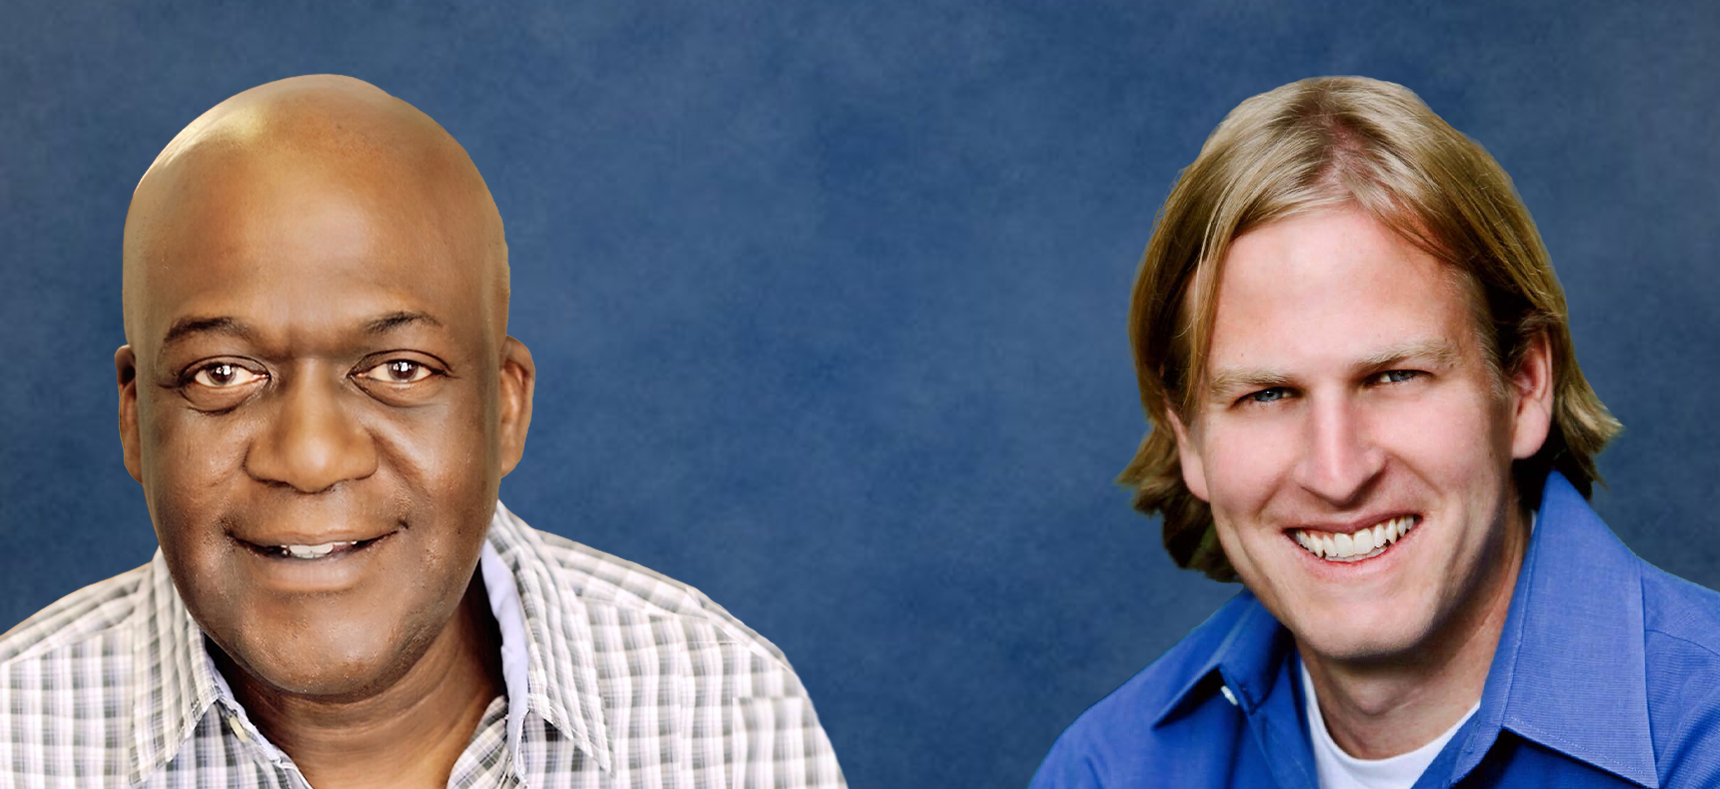 This weekend at Comedy Heights we bring you Albert Linton and Mark Schumacher.